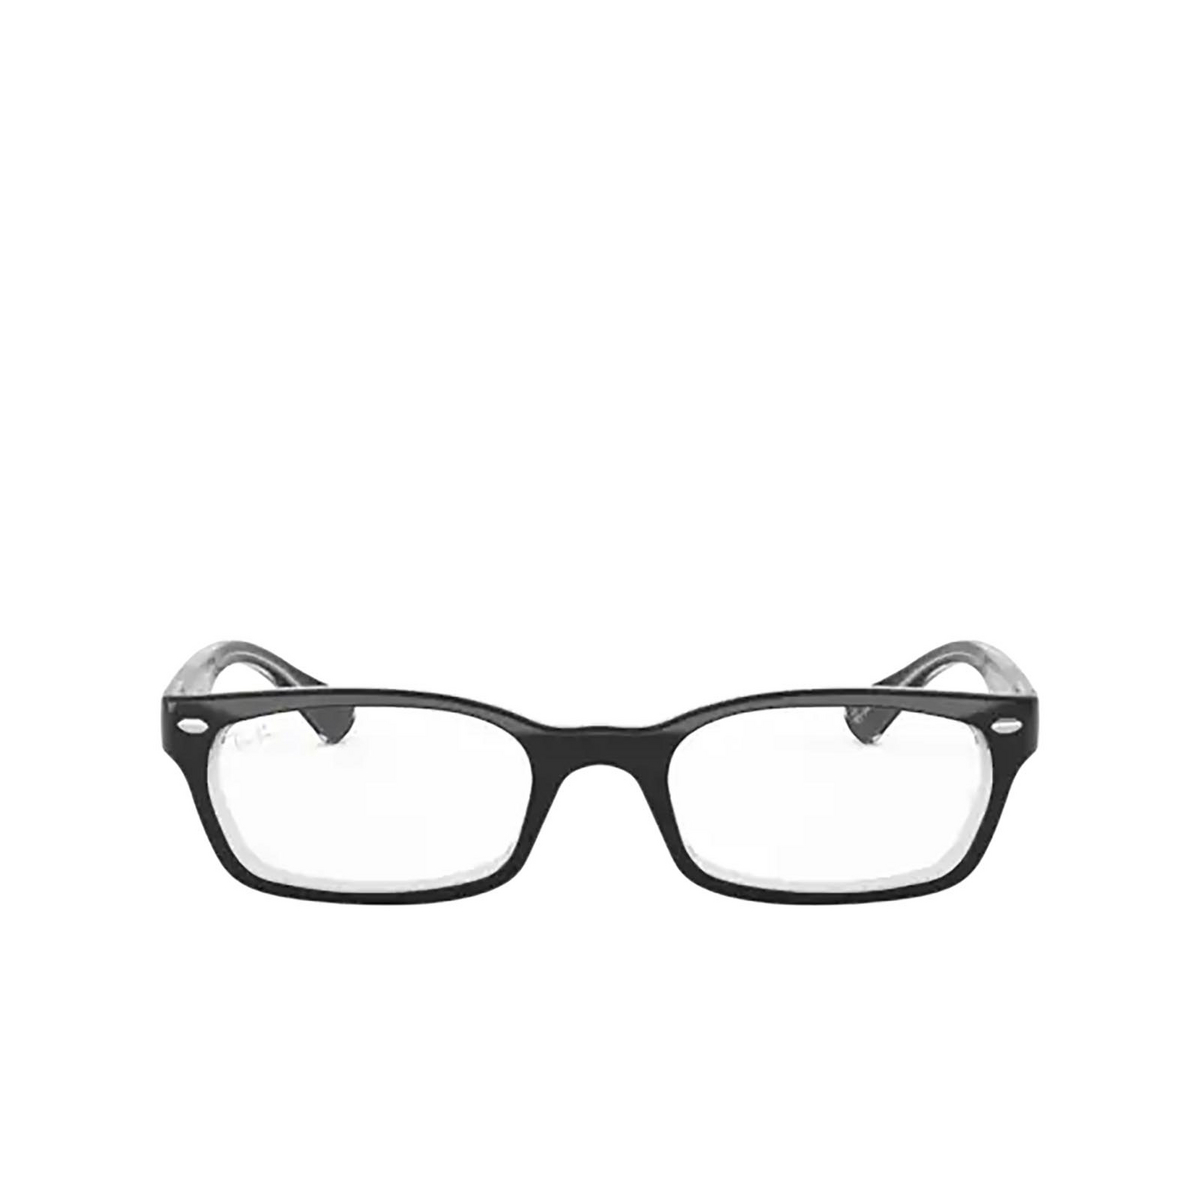 Ray-Ban RX5150 Eyeglasses 2034 Top Black on Transparent - front view